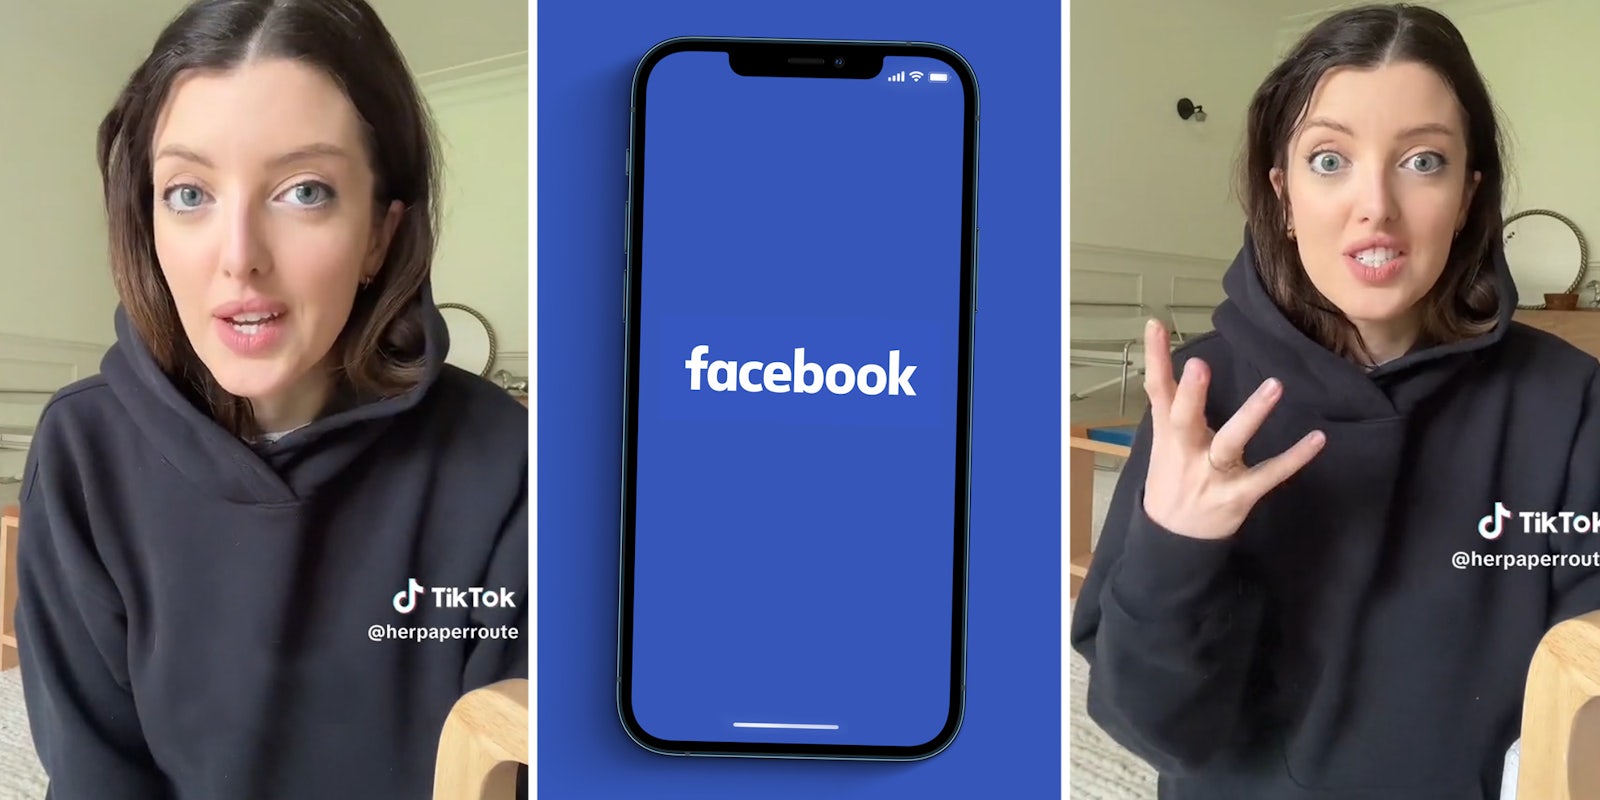 Woman talking to camera(l+r), Phone with Facebook app open